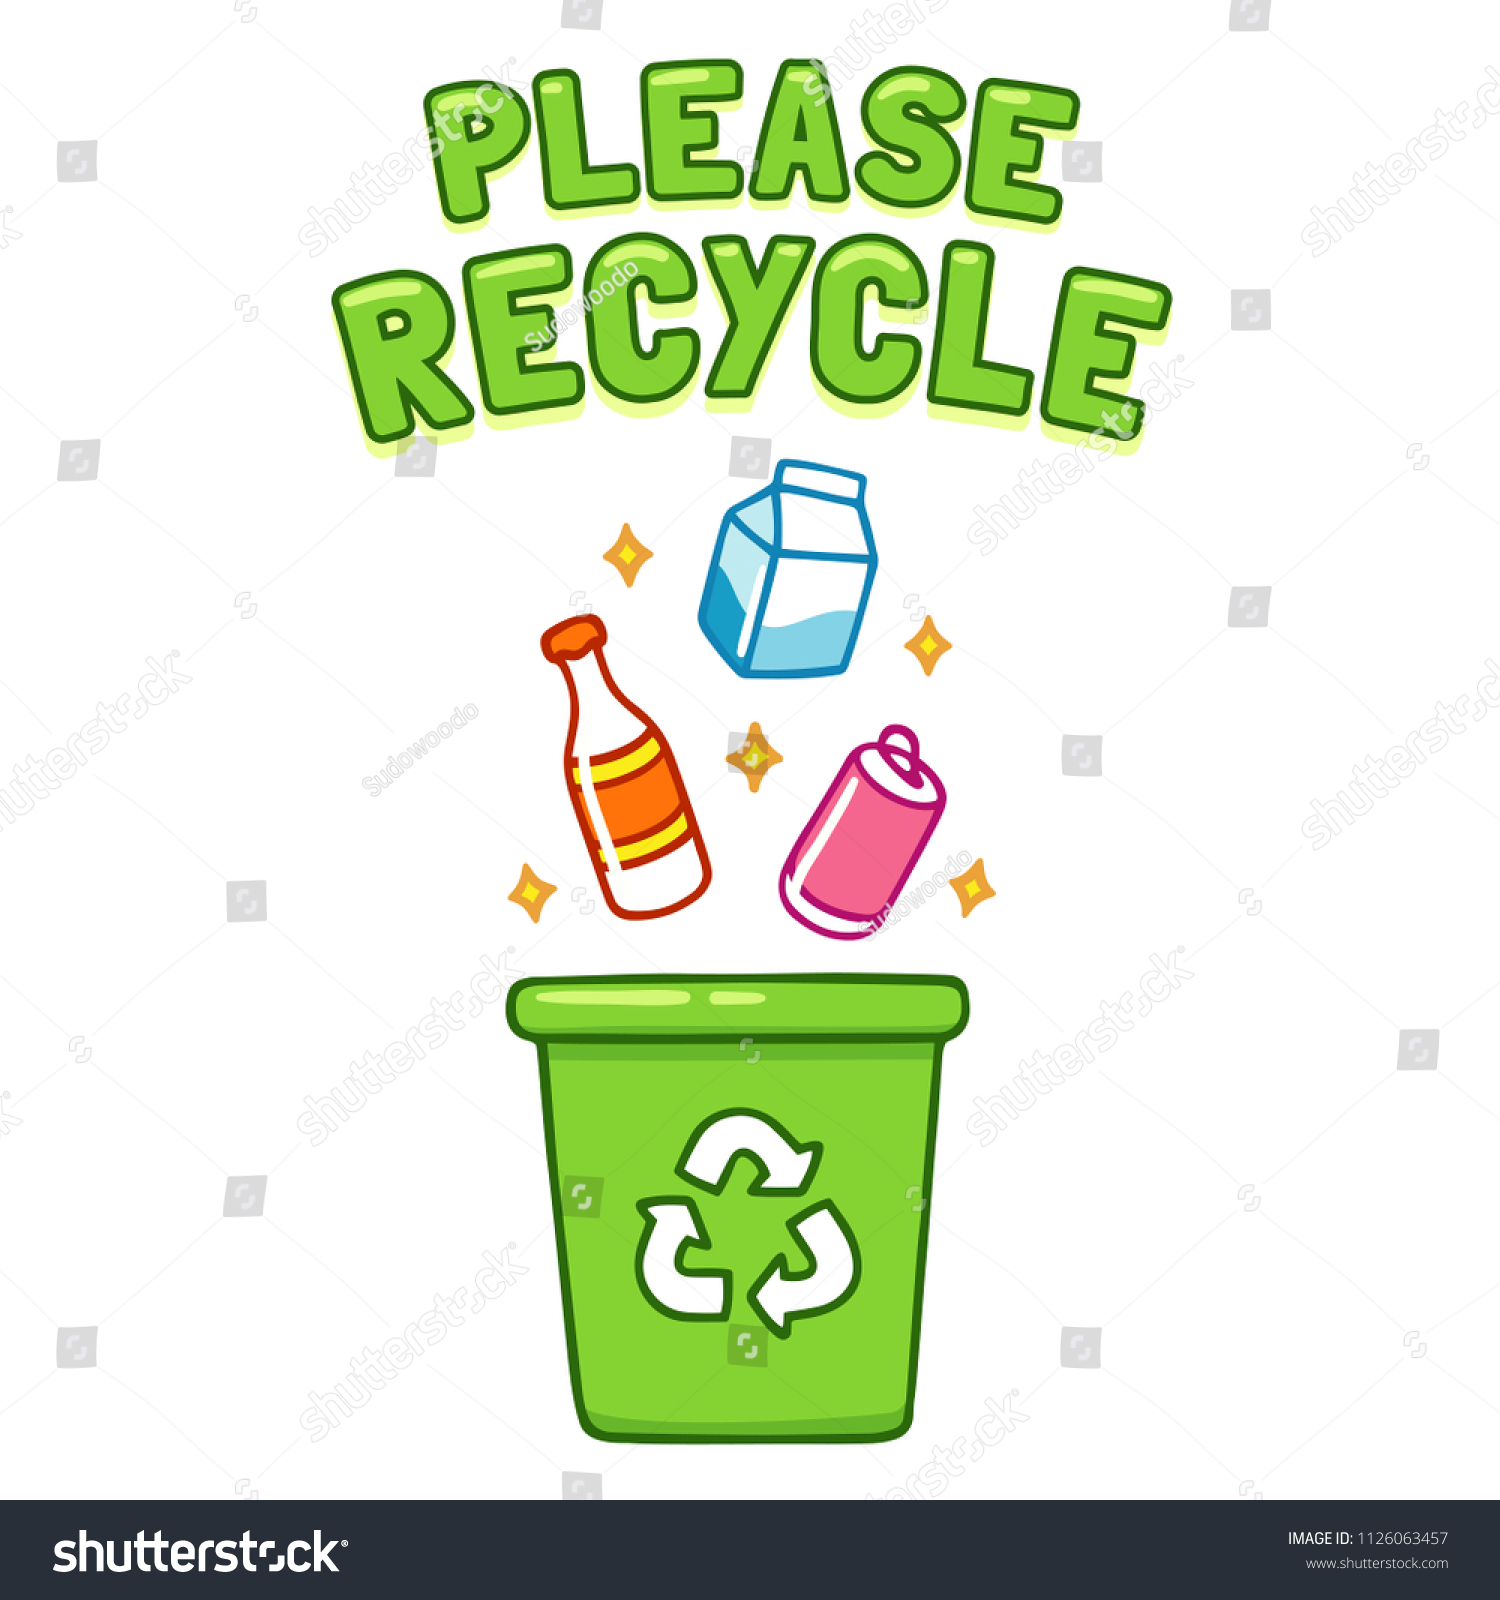 Cute Cartoon Please Recycle Poster Throwing Stock Vector (Royalty Free ...